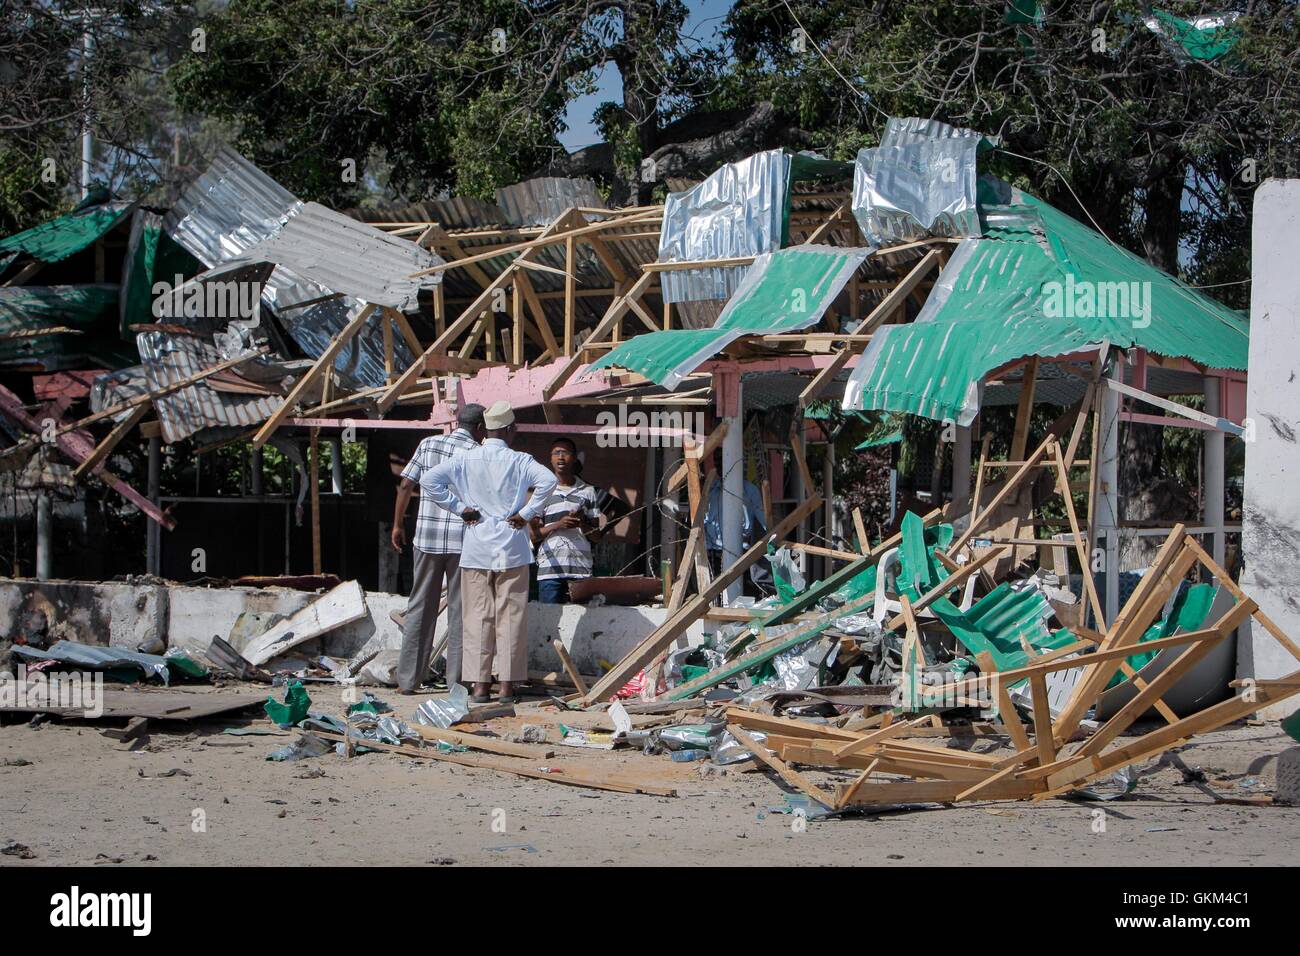 SOMALIA, Mogadishu: In a photograph taken and released 07 September 2013 by the African Union-United Nations Information Support Team, two men talk to workers clearing debris at the Village Restaurant after a double suicide attack by Al-Qaeda-affiliated extremist group Al Shabaab killed 18 people and injured dozens more at the popular Mogadishu eatery in the Somali capital. Speaking at the opening of a National Conference on Tackling Extremism in Somalia in the capital today, Presdient Hassan Sheikh Mohamud said that extremists no longer only attack government officials and foreign missions, b Stock Photo